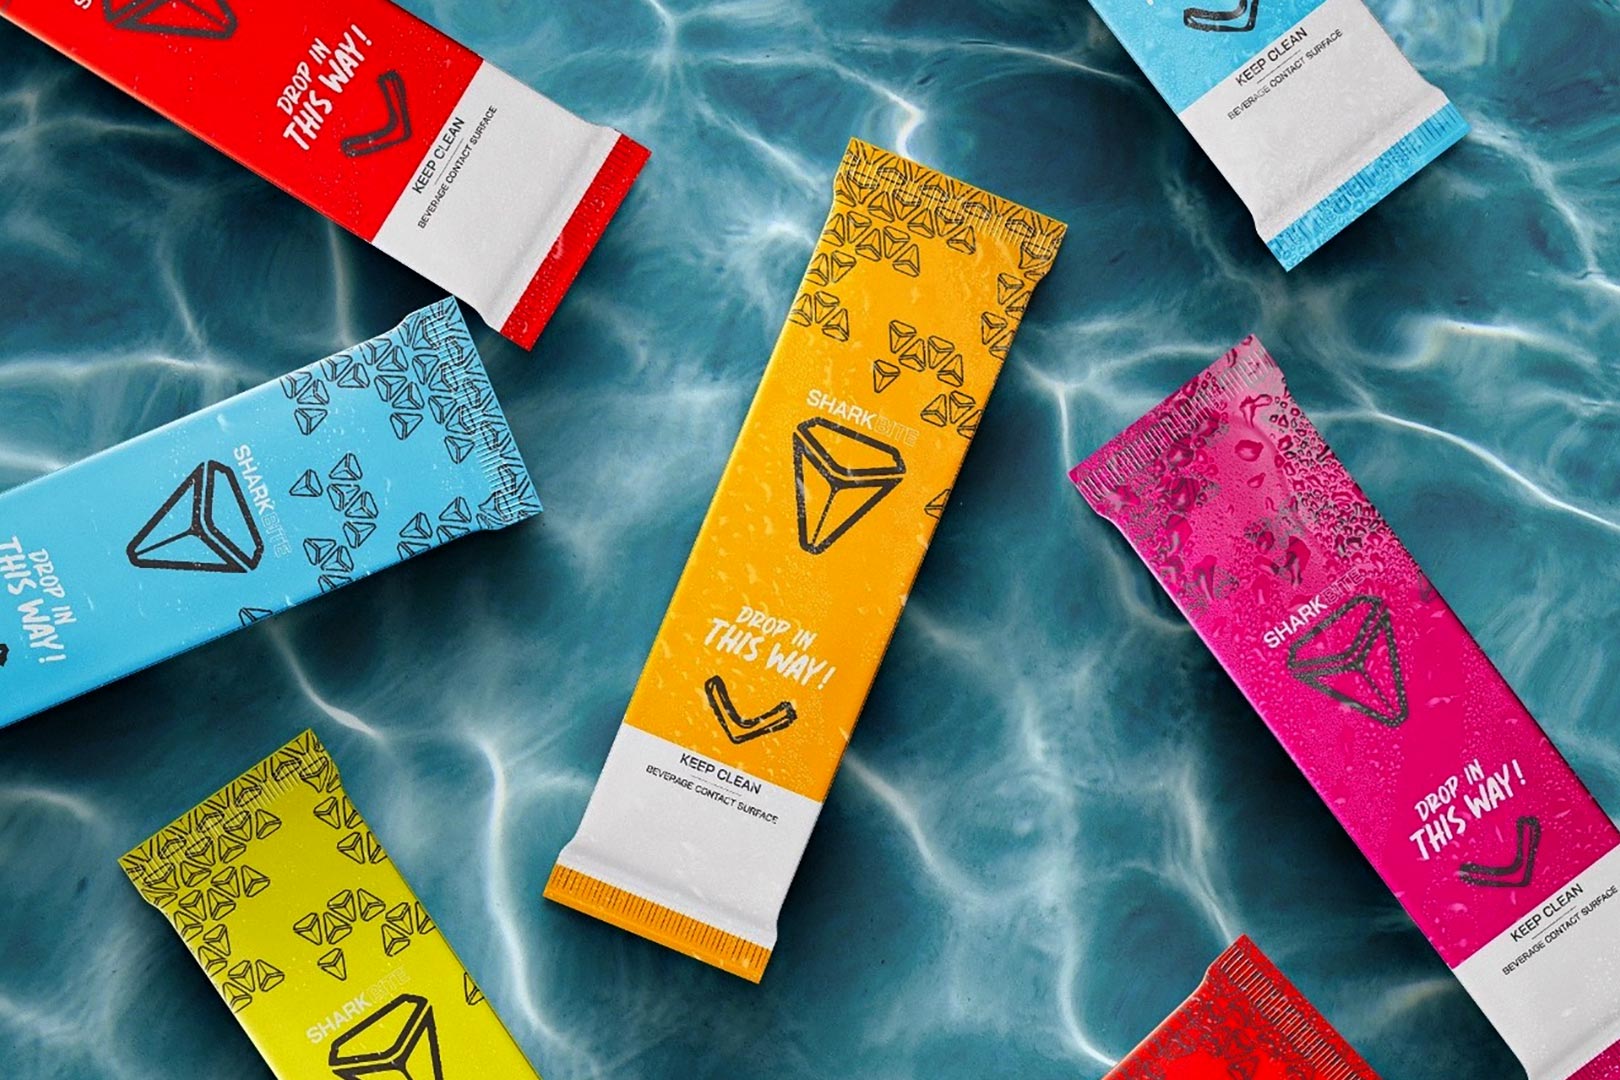 Hydration newcomer Sharkbite puts together standard and caffeine-infused versions